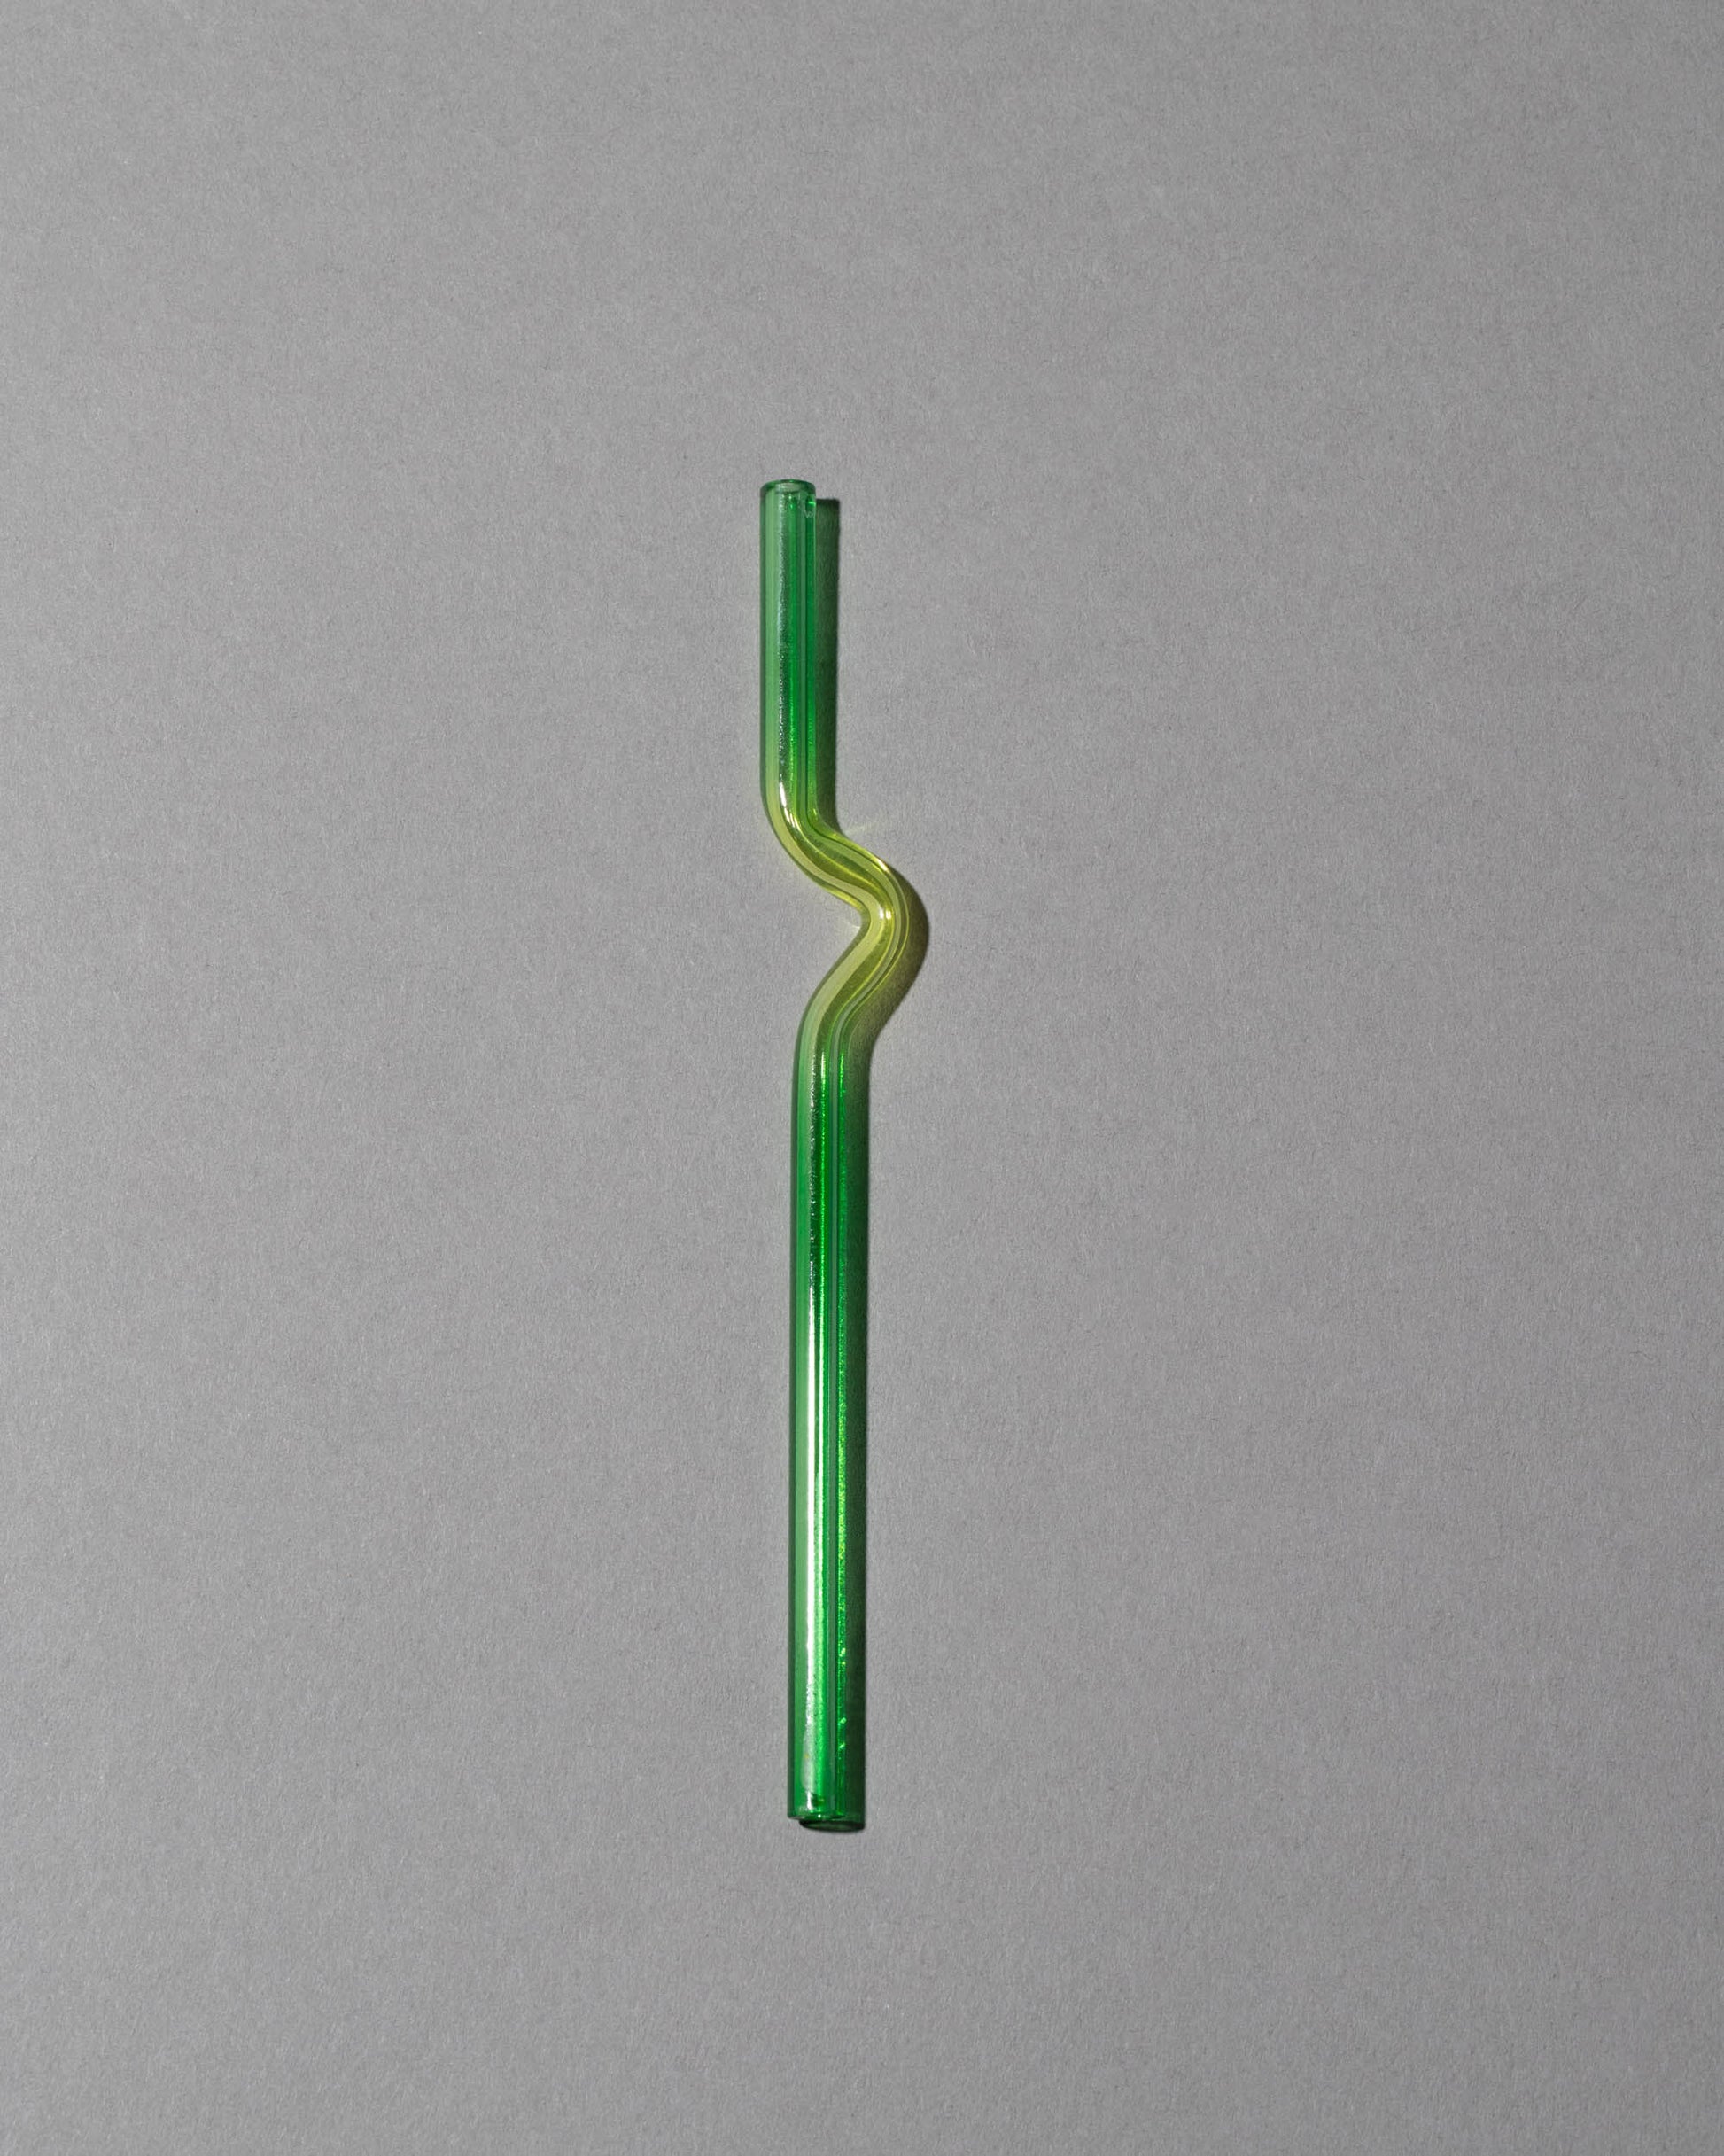 Misha Kahn Yellow and Green Suck It Up Glass Cocktail Straw on light color background.